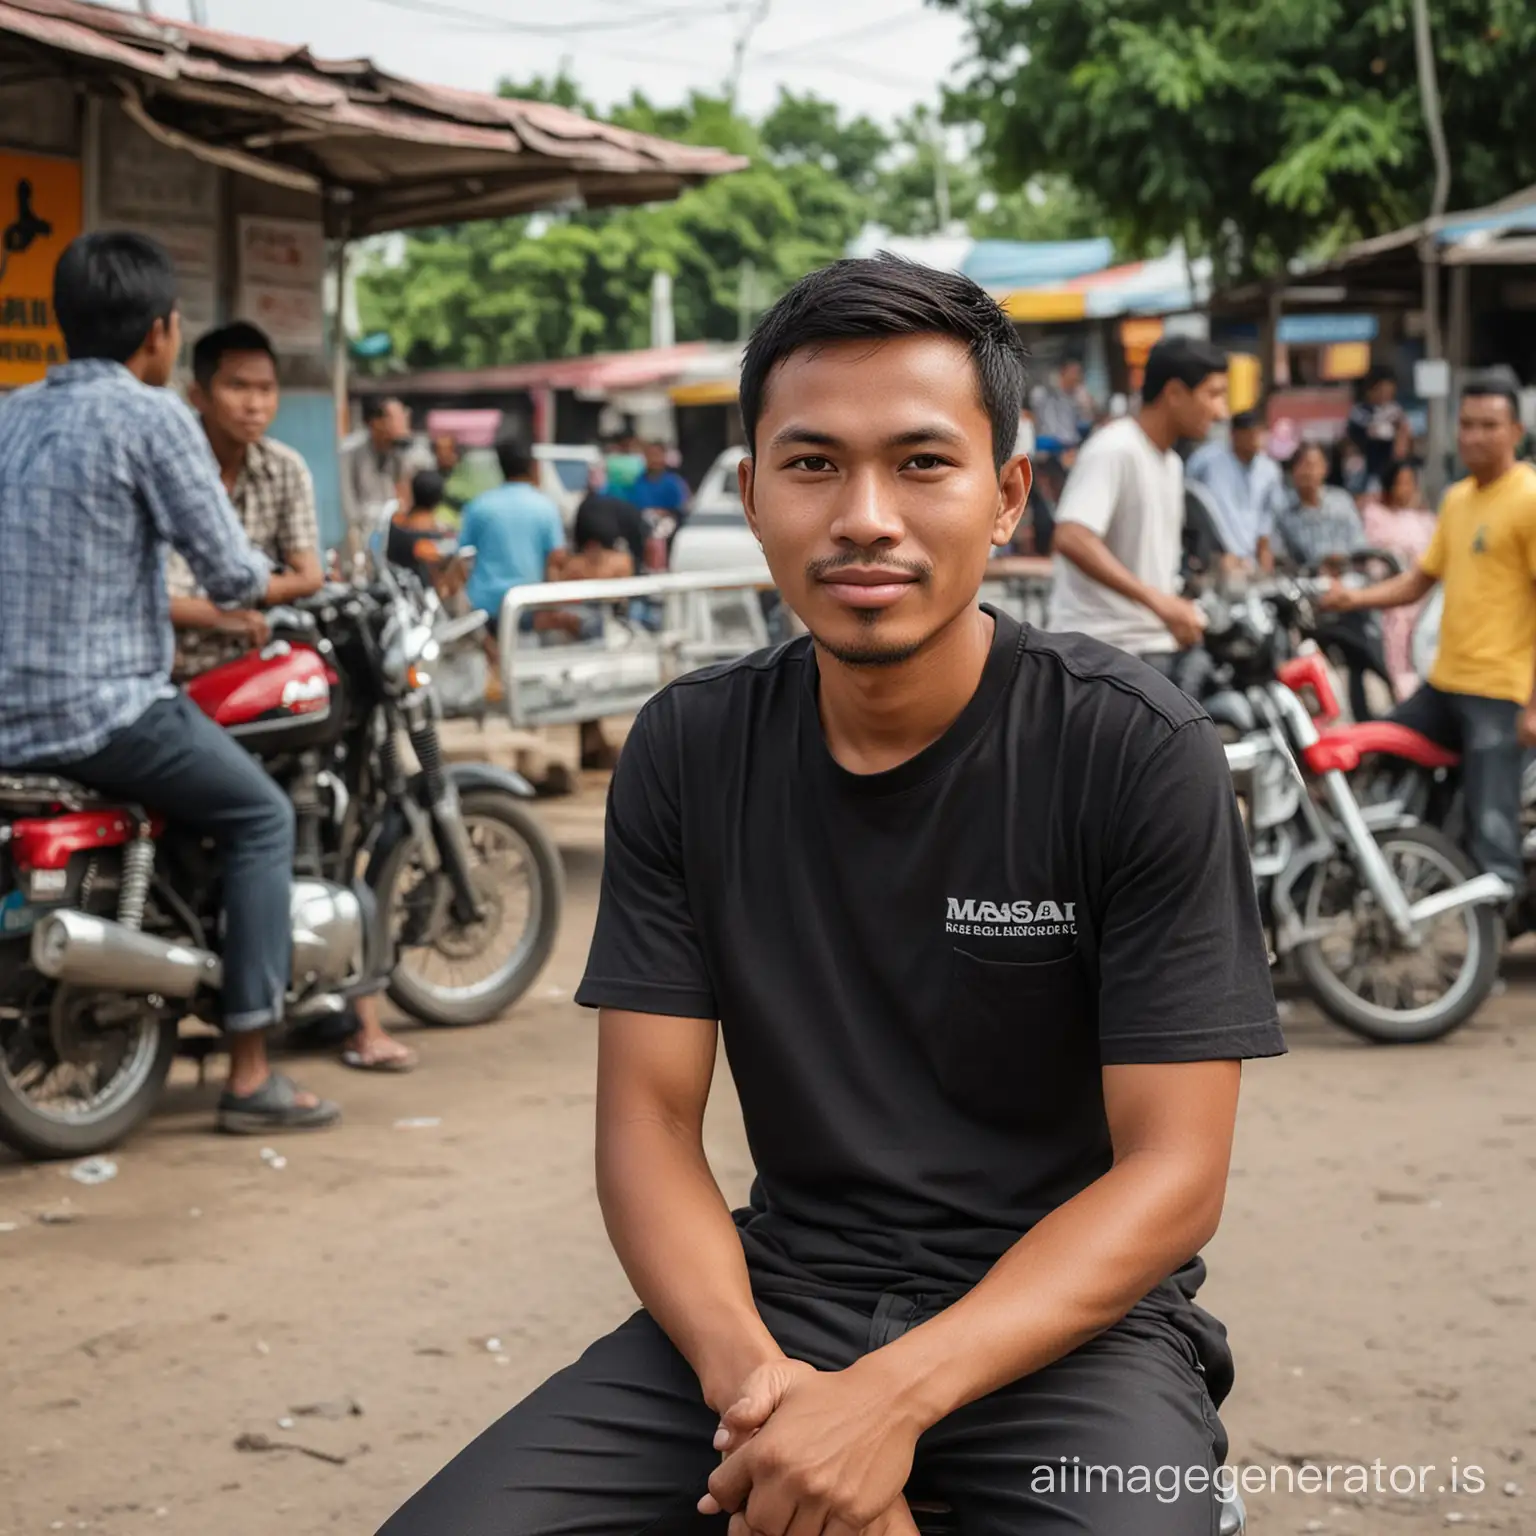 Indonesian-Man-in-Casual-Wear-at-Motorcycle-Taxi-Stand